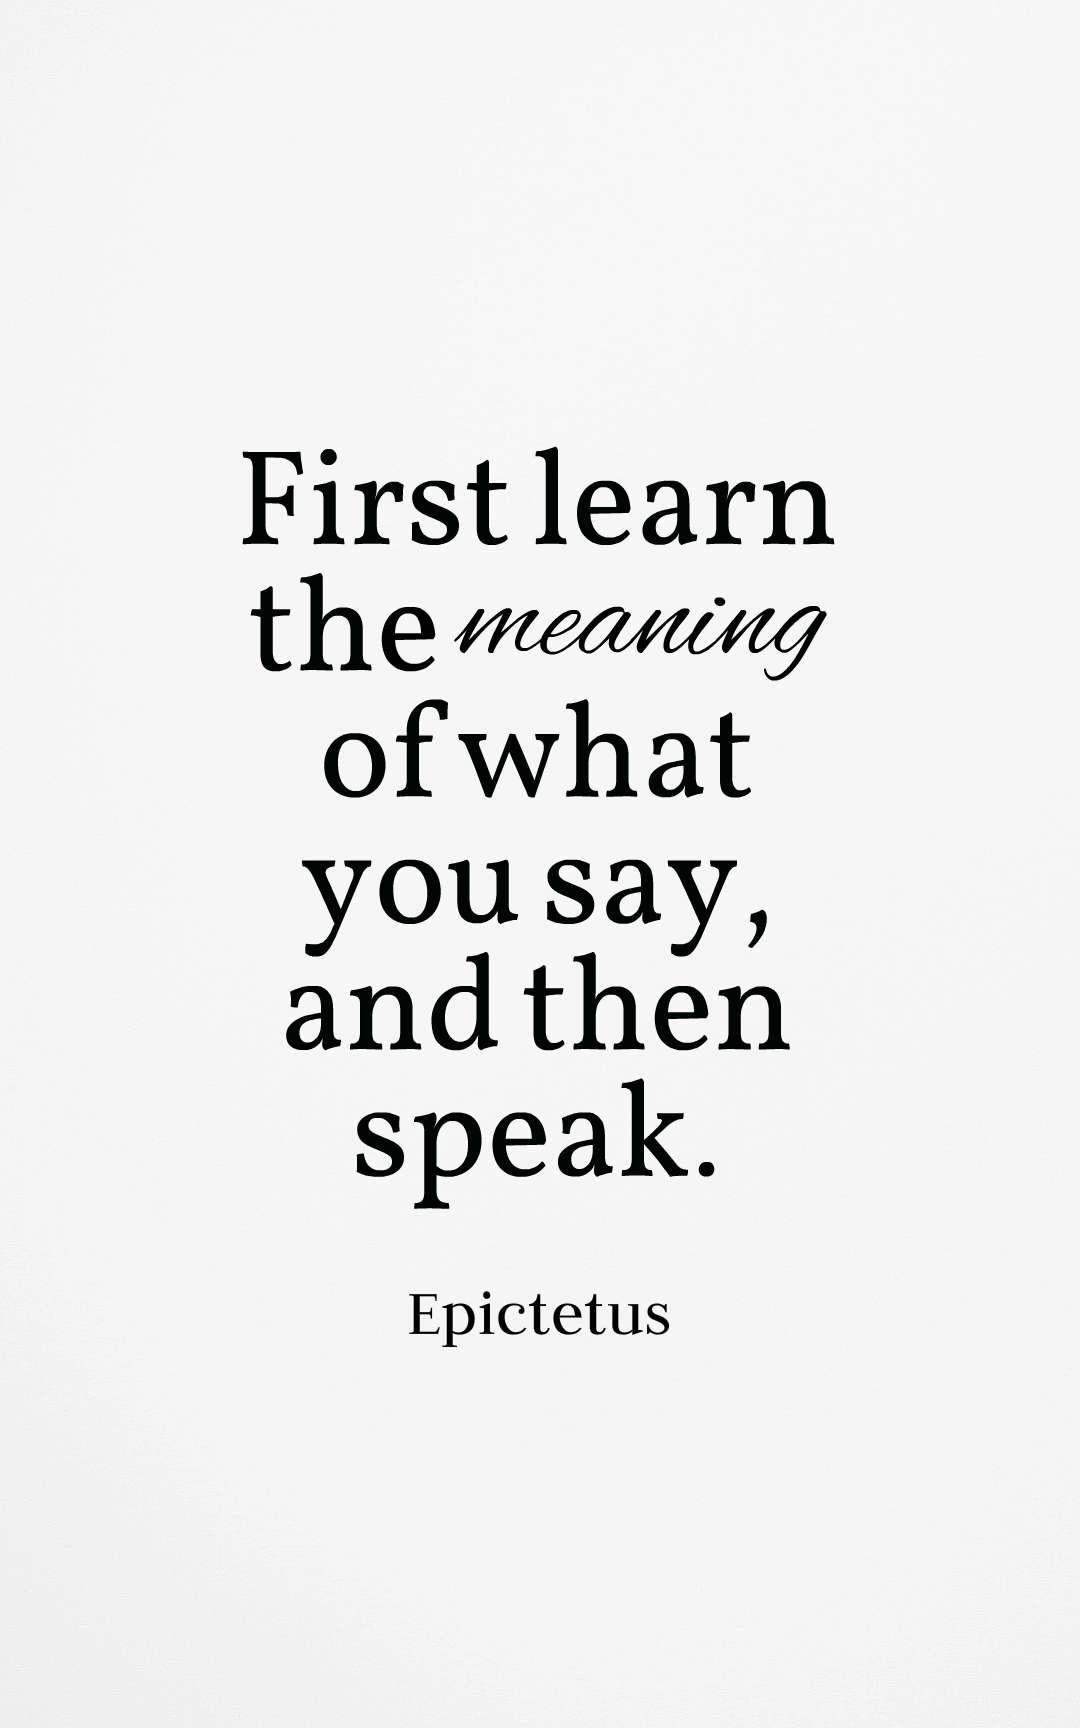 First learn the meaning of what you say, and then speak – Epictetus